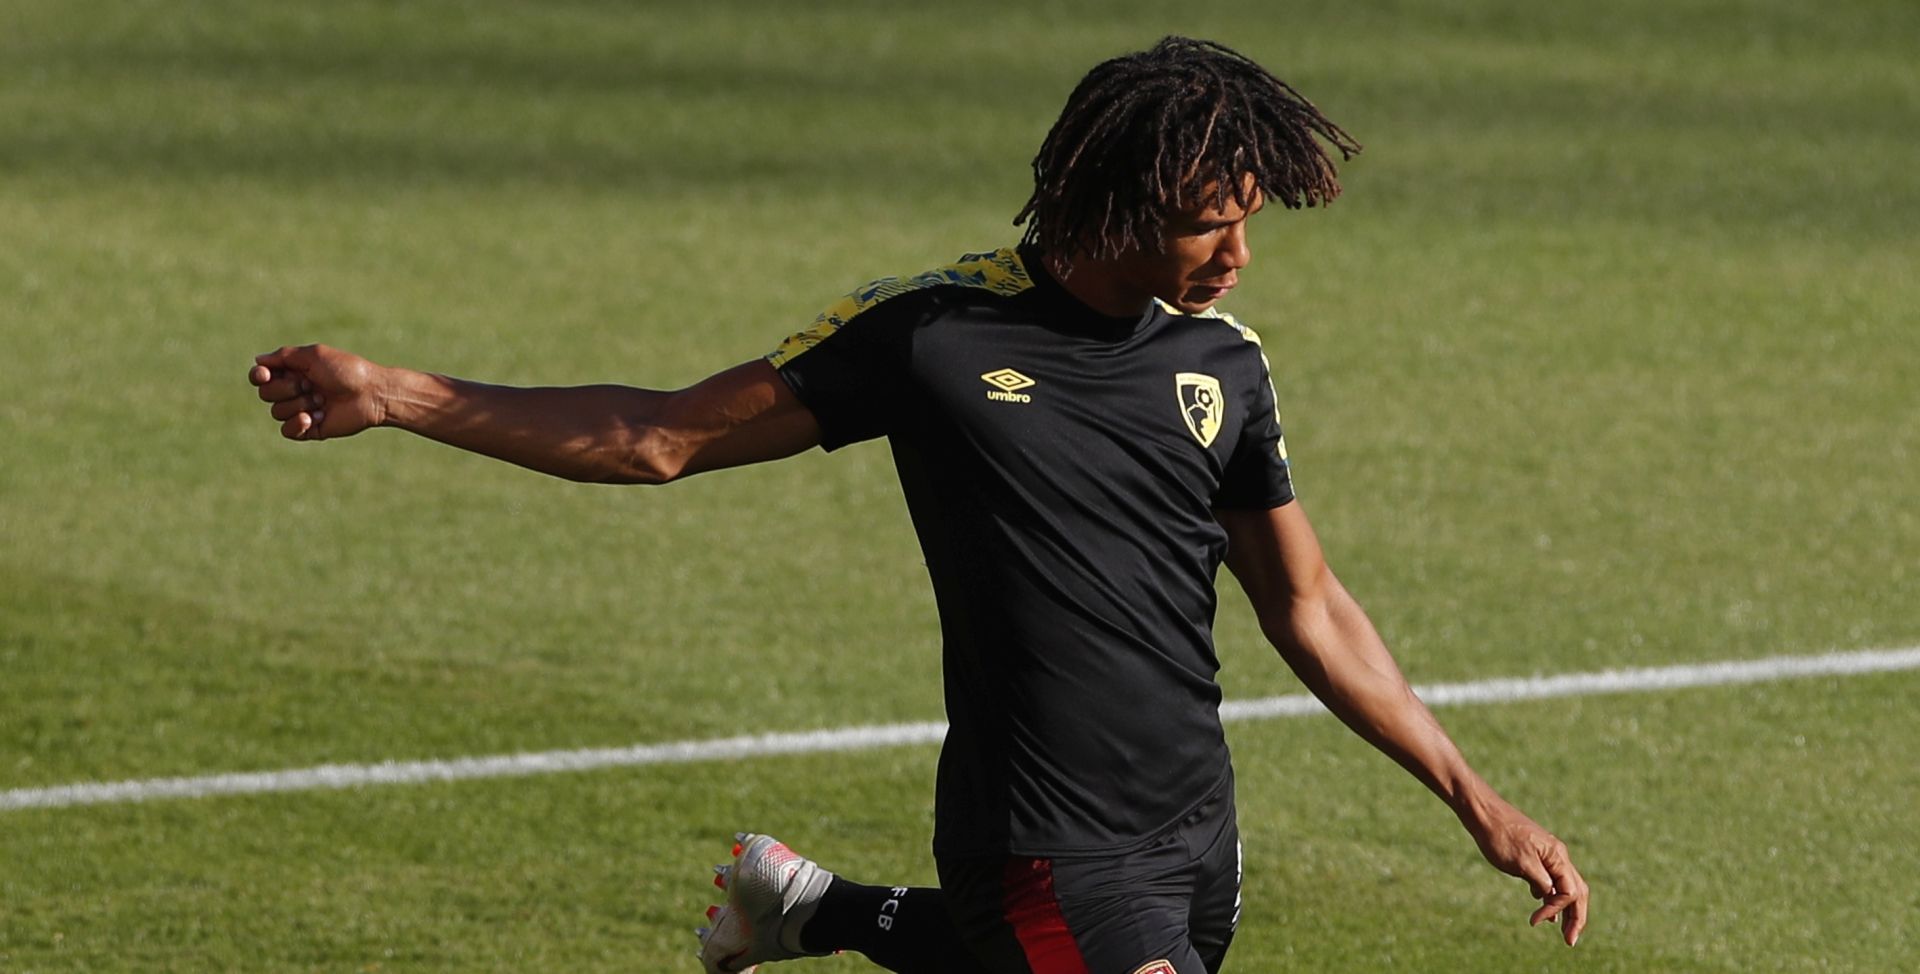 epa08542194 Bournemouth's Nathan Ake in action during the warm-up before the English Premier League match between AFC Bournemouth and Leicester City in Bournemouth, Britain, 12 July 2020.  EPA/Andy Couldridge/NMC/Pool EDITORIAL USE ONLY. No use with unauthorized audio, video, data, fixture lists, club/league logos or 'live' services. Online in-match use limited to 120 images, no video emulation. No use in betting, games or single club/league/player publications.